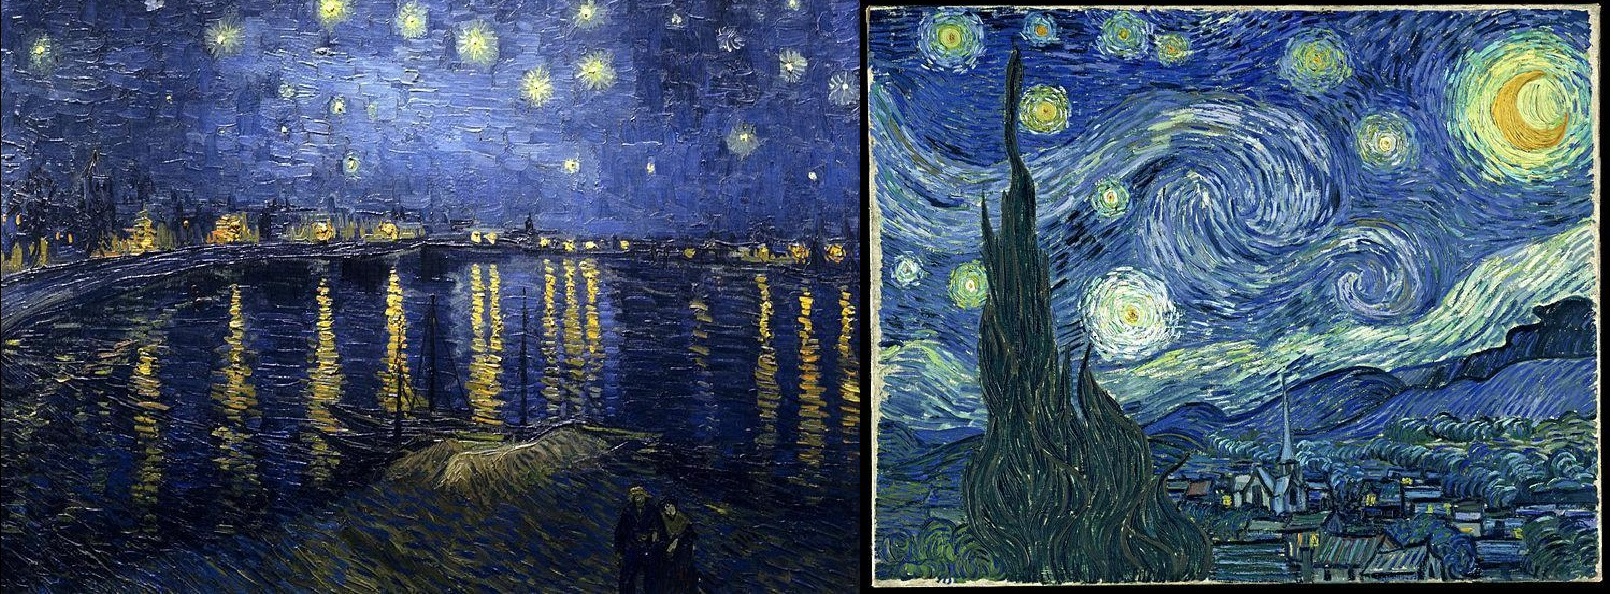 "Starry, Starry Night ... Vincent!